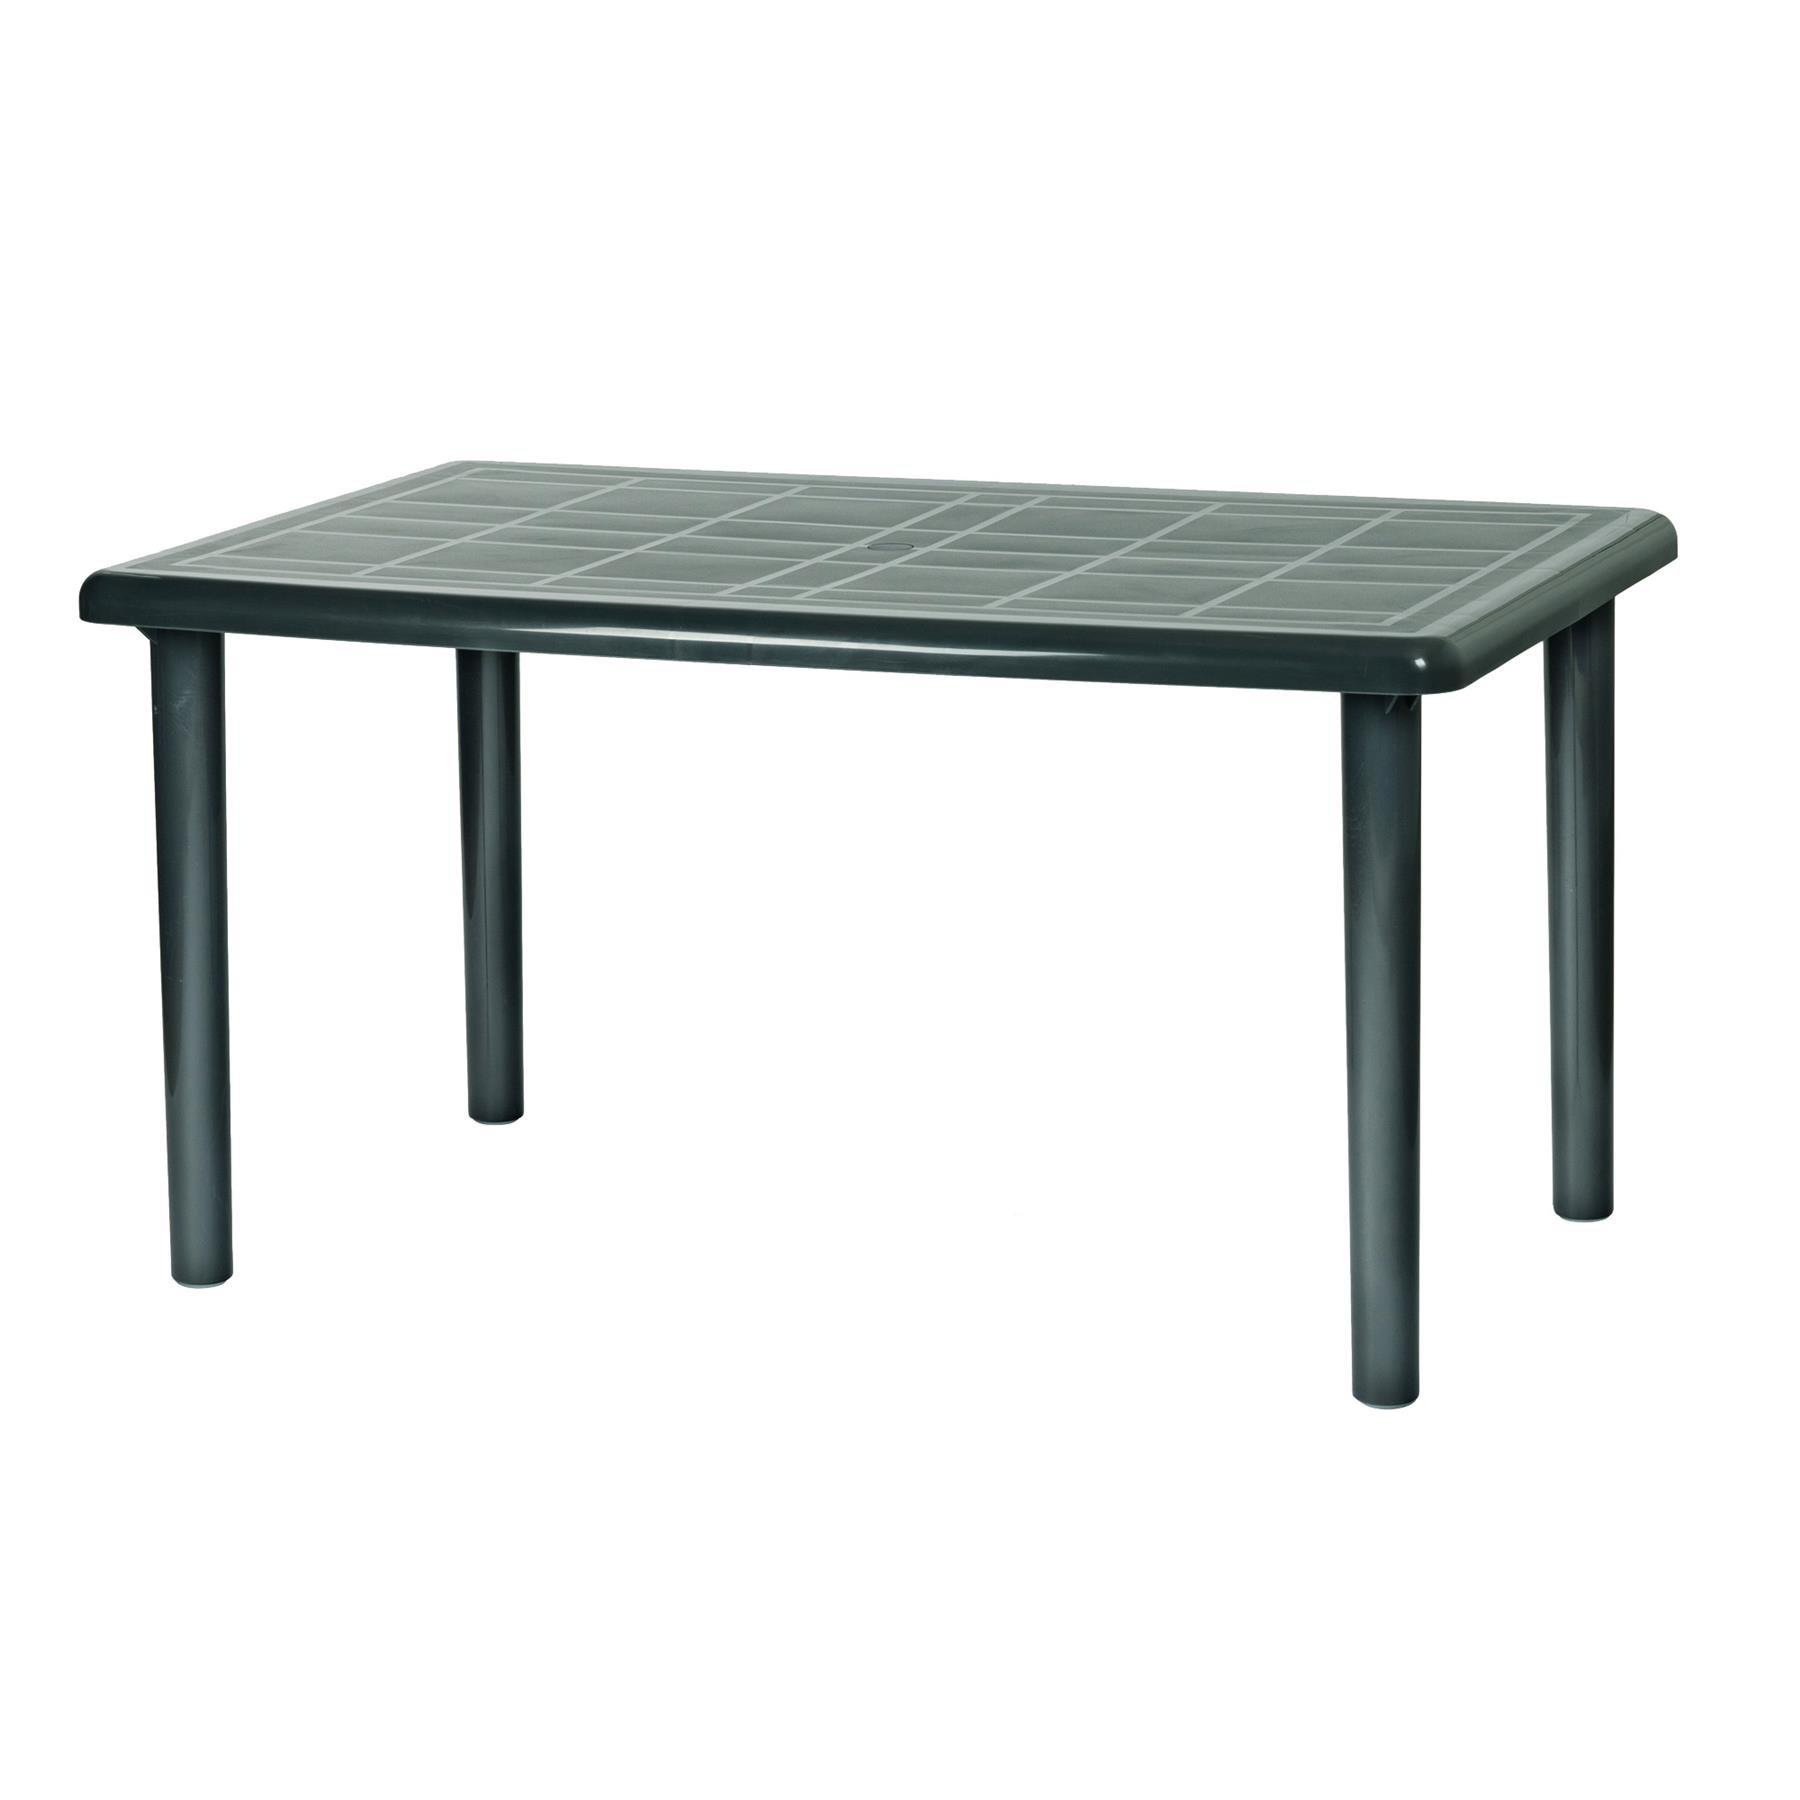 Olot 6 Seater Dining Table